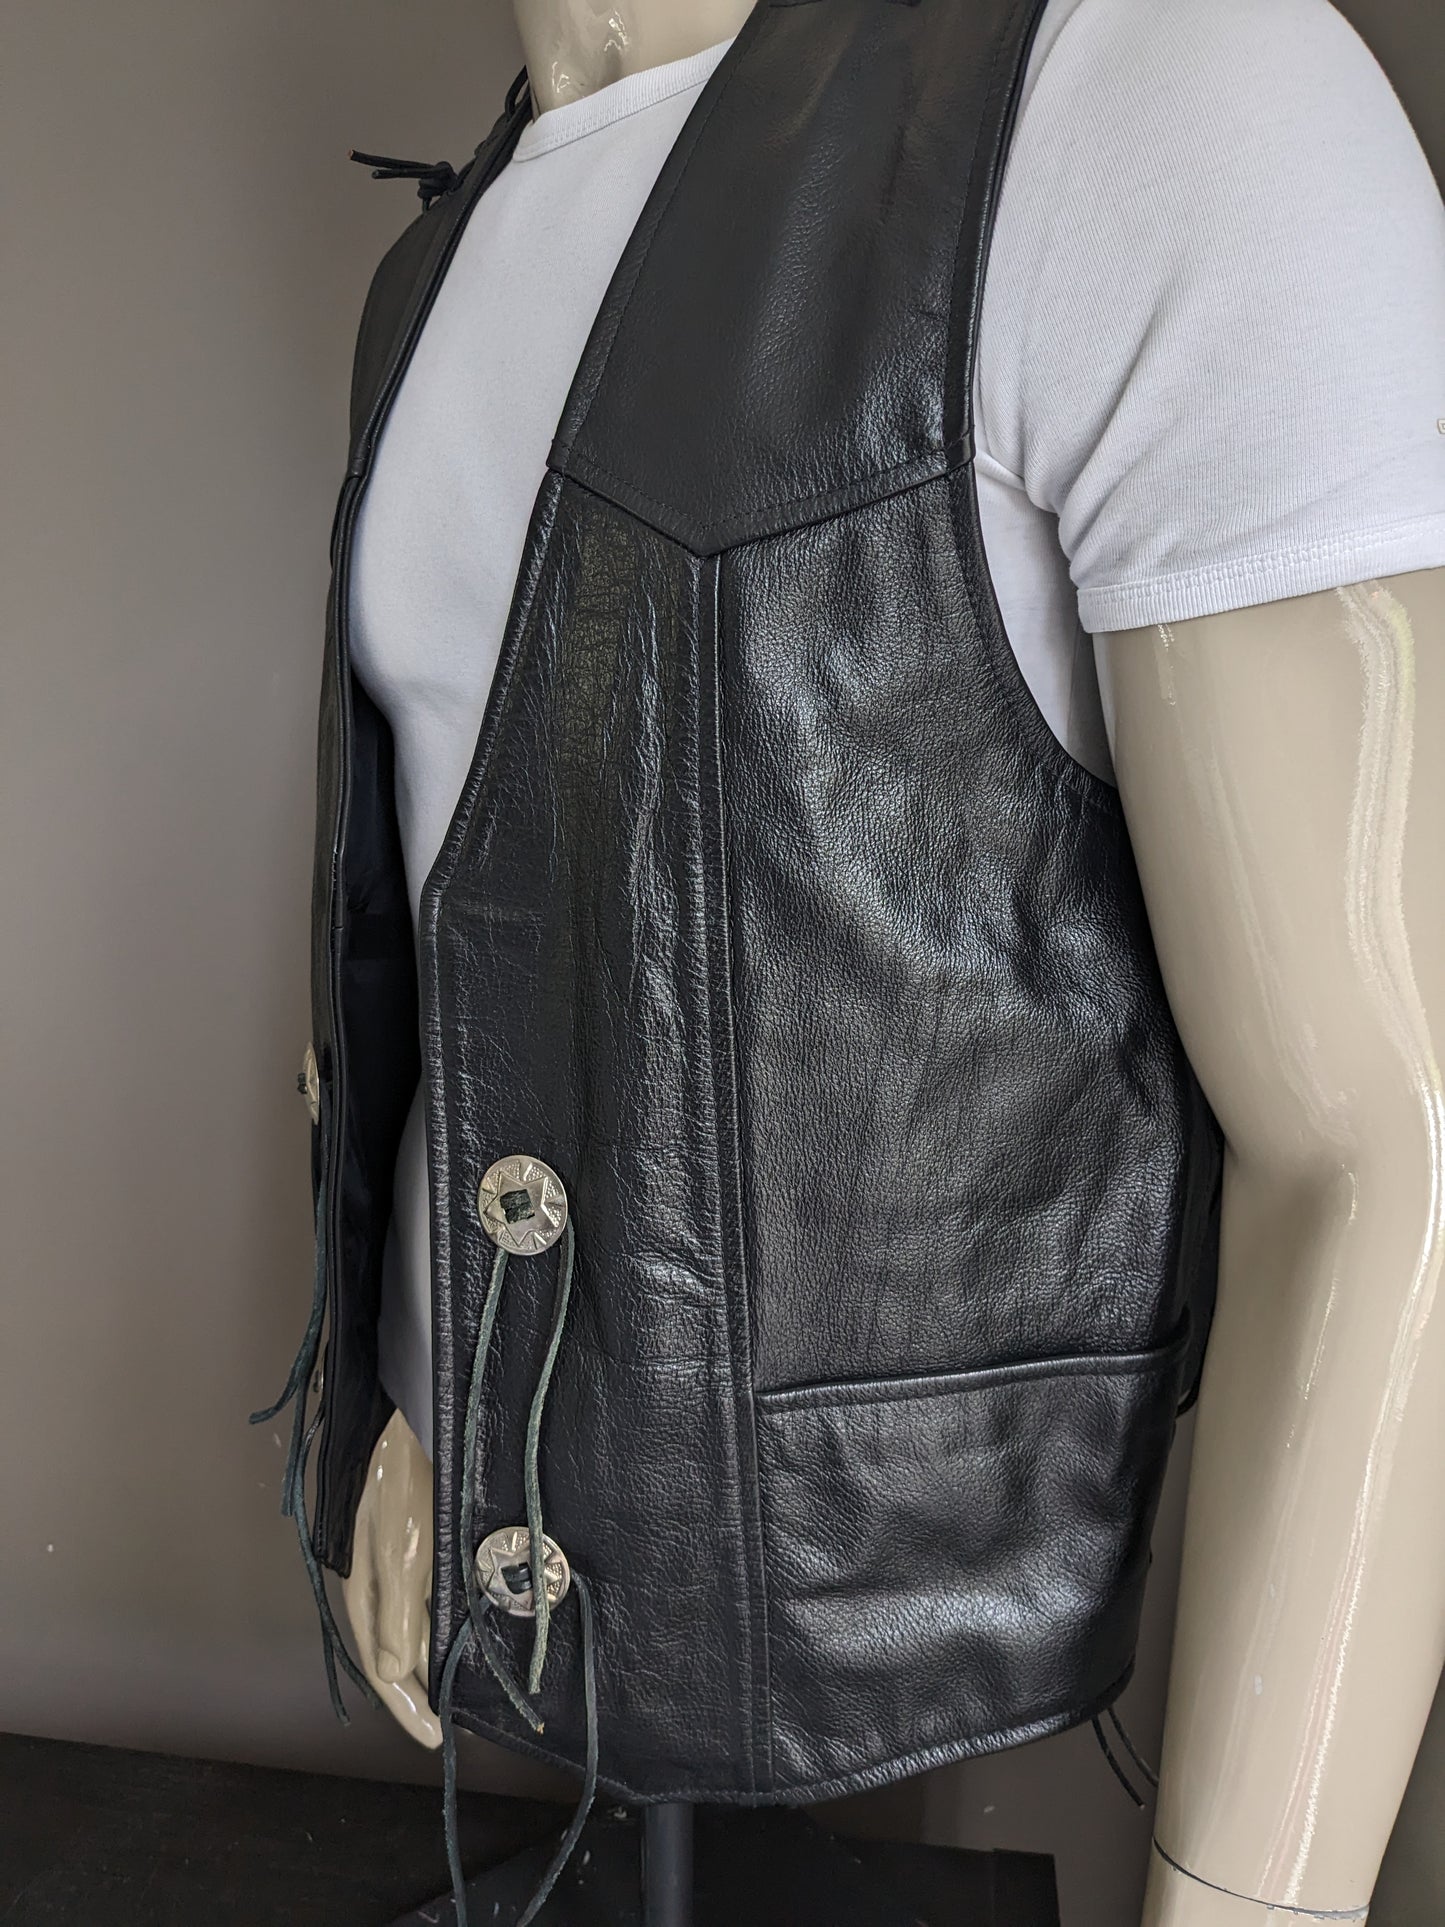 Tough master's leather leather biker waistcoat. Double-sided with lace & spas applications. Black colored. Size 2XL.